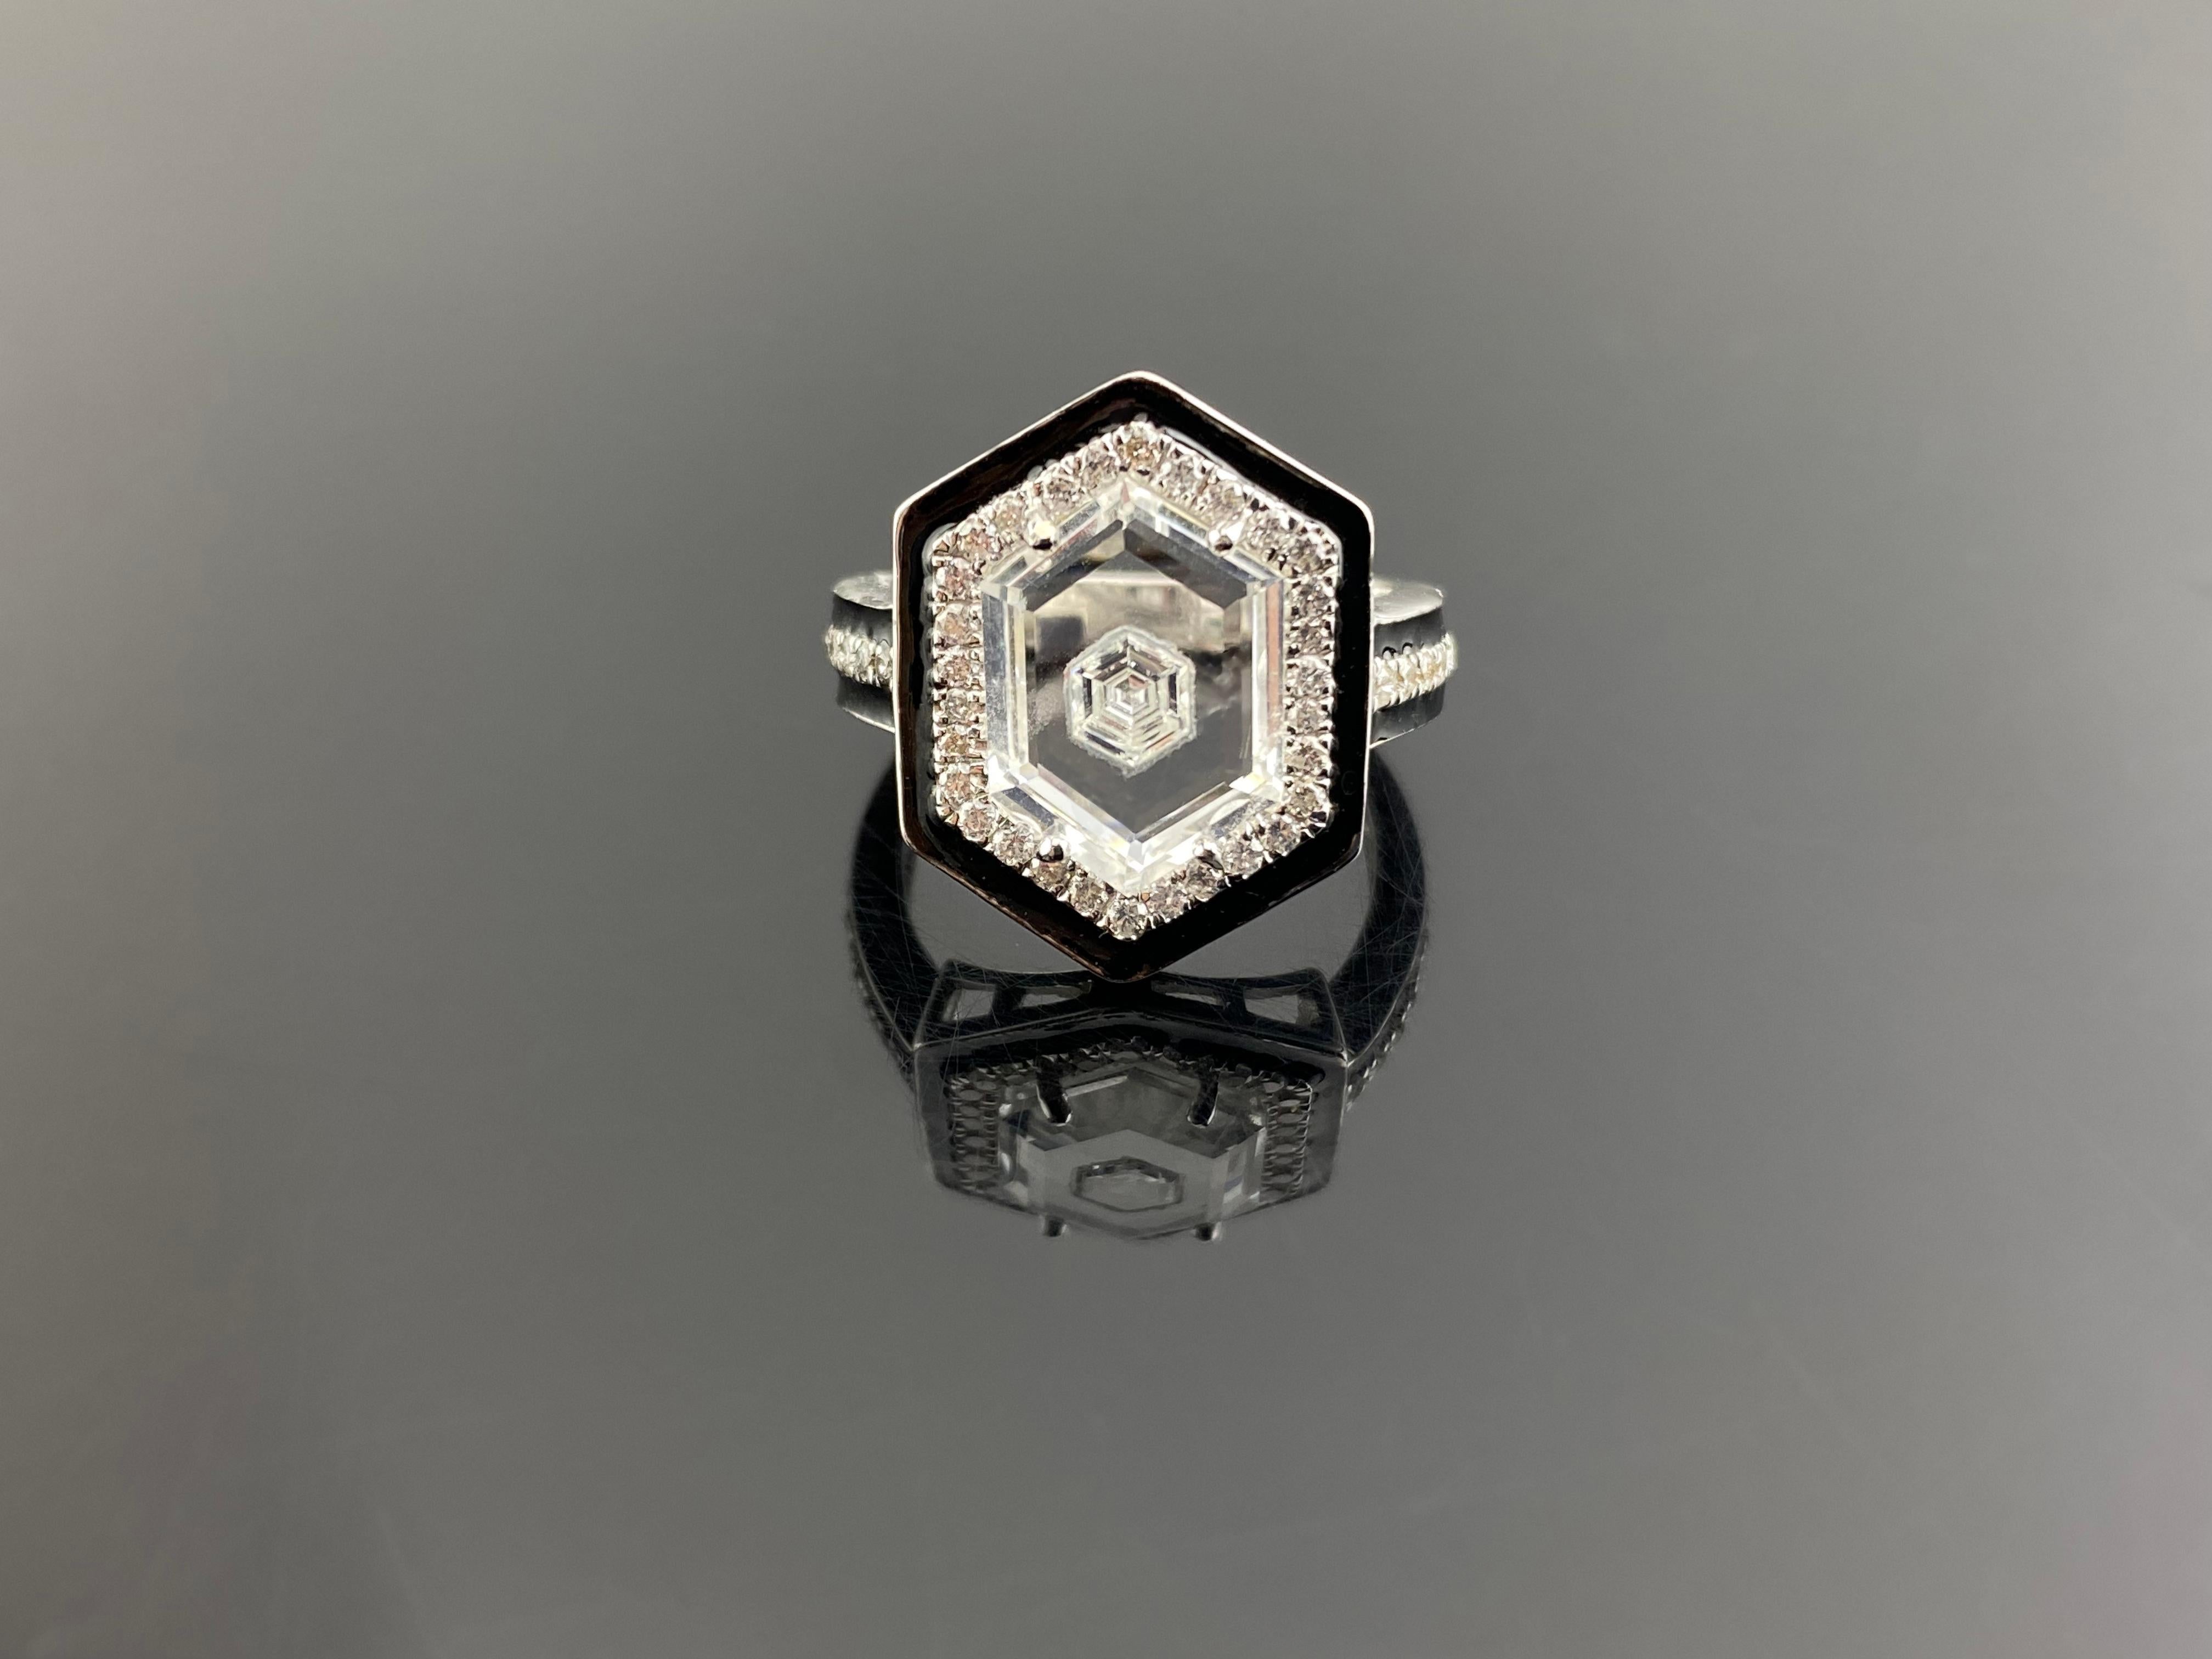 Old world craftsmanship with todays technology, this vintage art deco inspired ring may be even better than others. A stunning 0.15 carat hexagon diamond inlayed in a polished custom cut rock crystal, surrounded by 0.36 carat round diamonds and 5.9